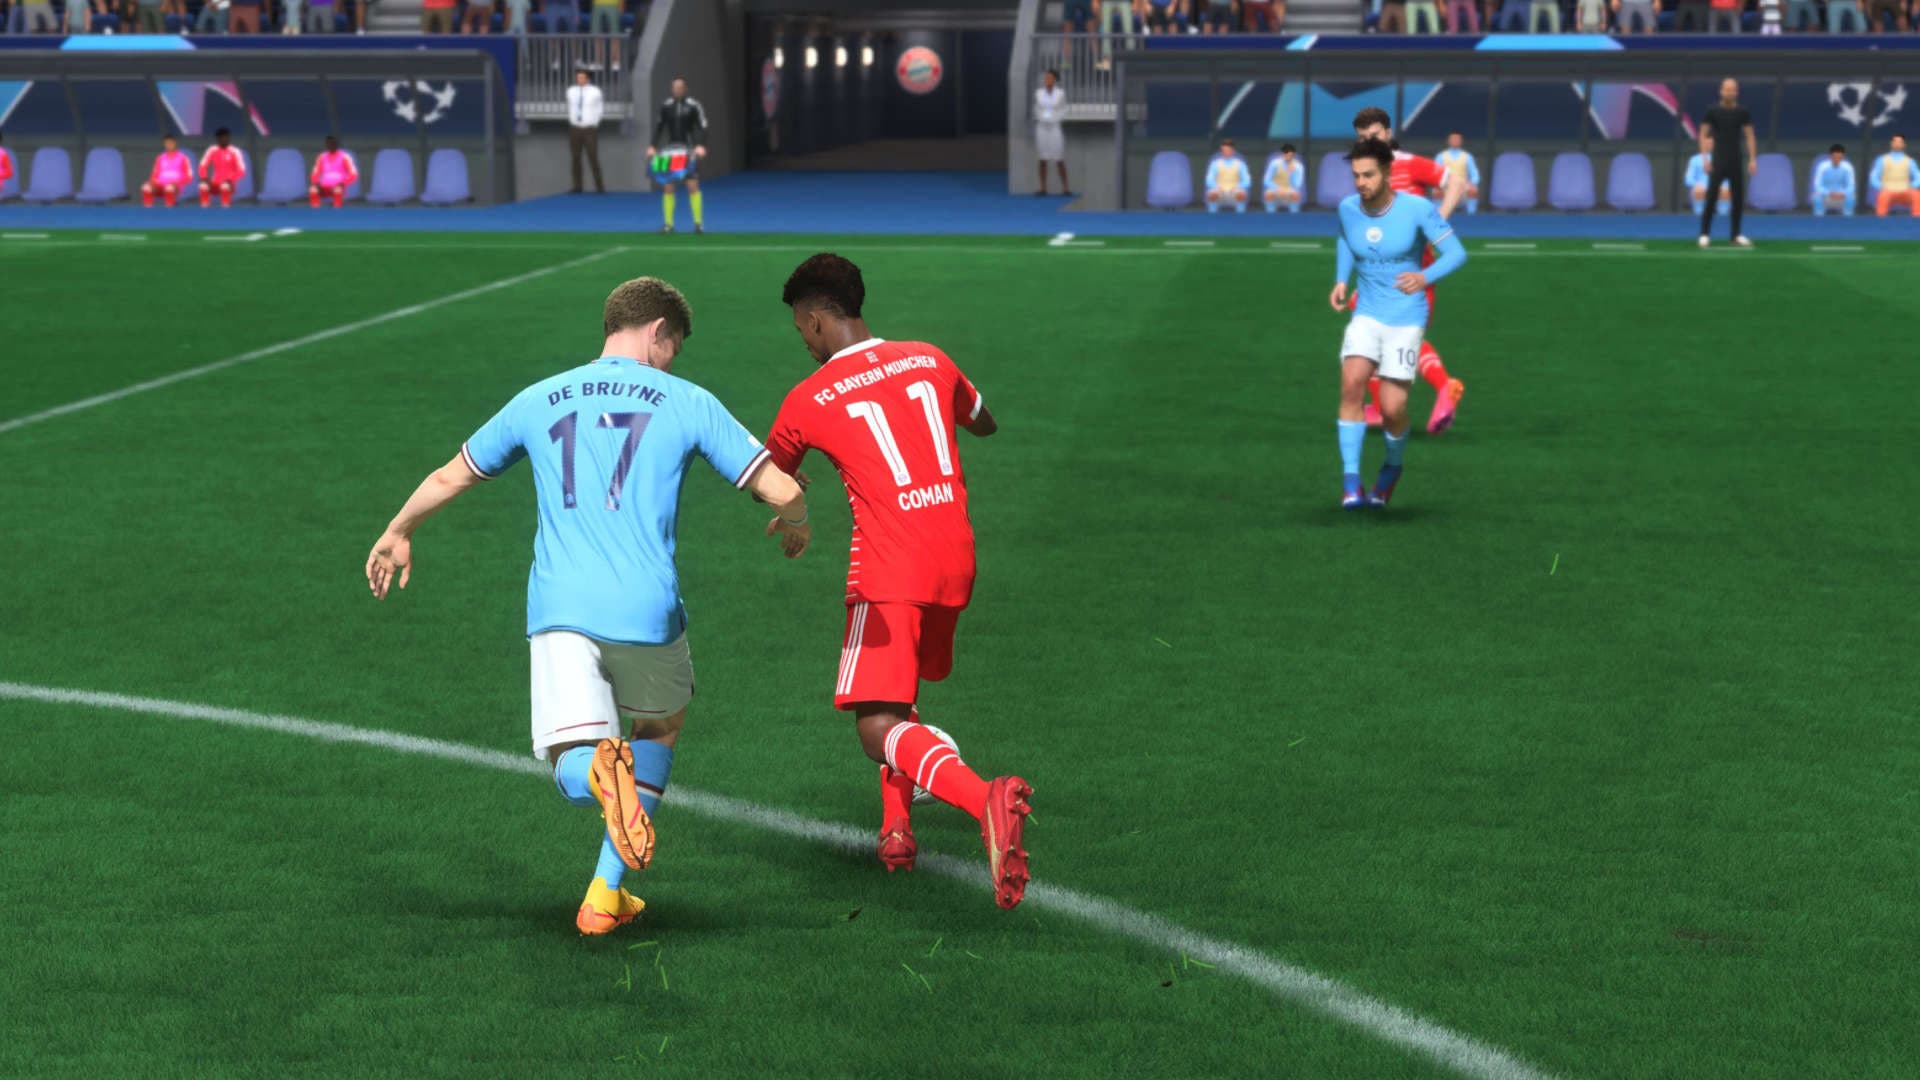 FIFA 23: An Announced Update That Could Benefit Skill Fans